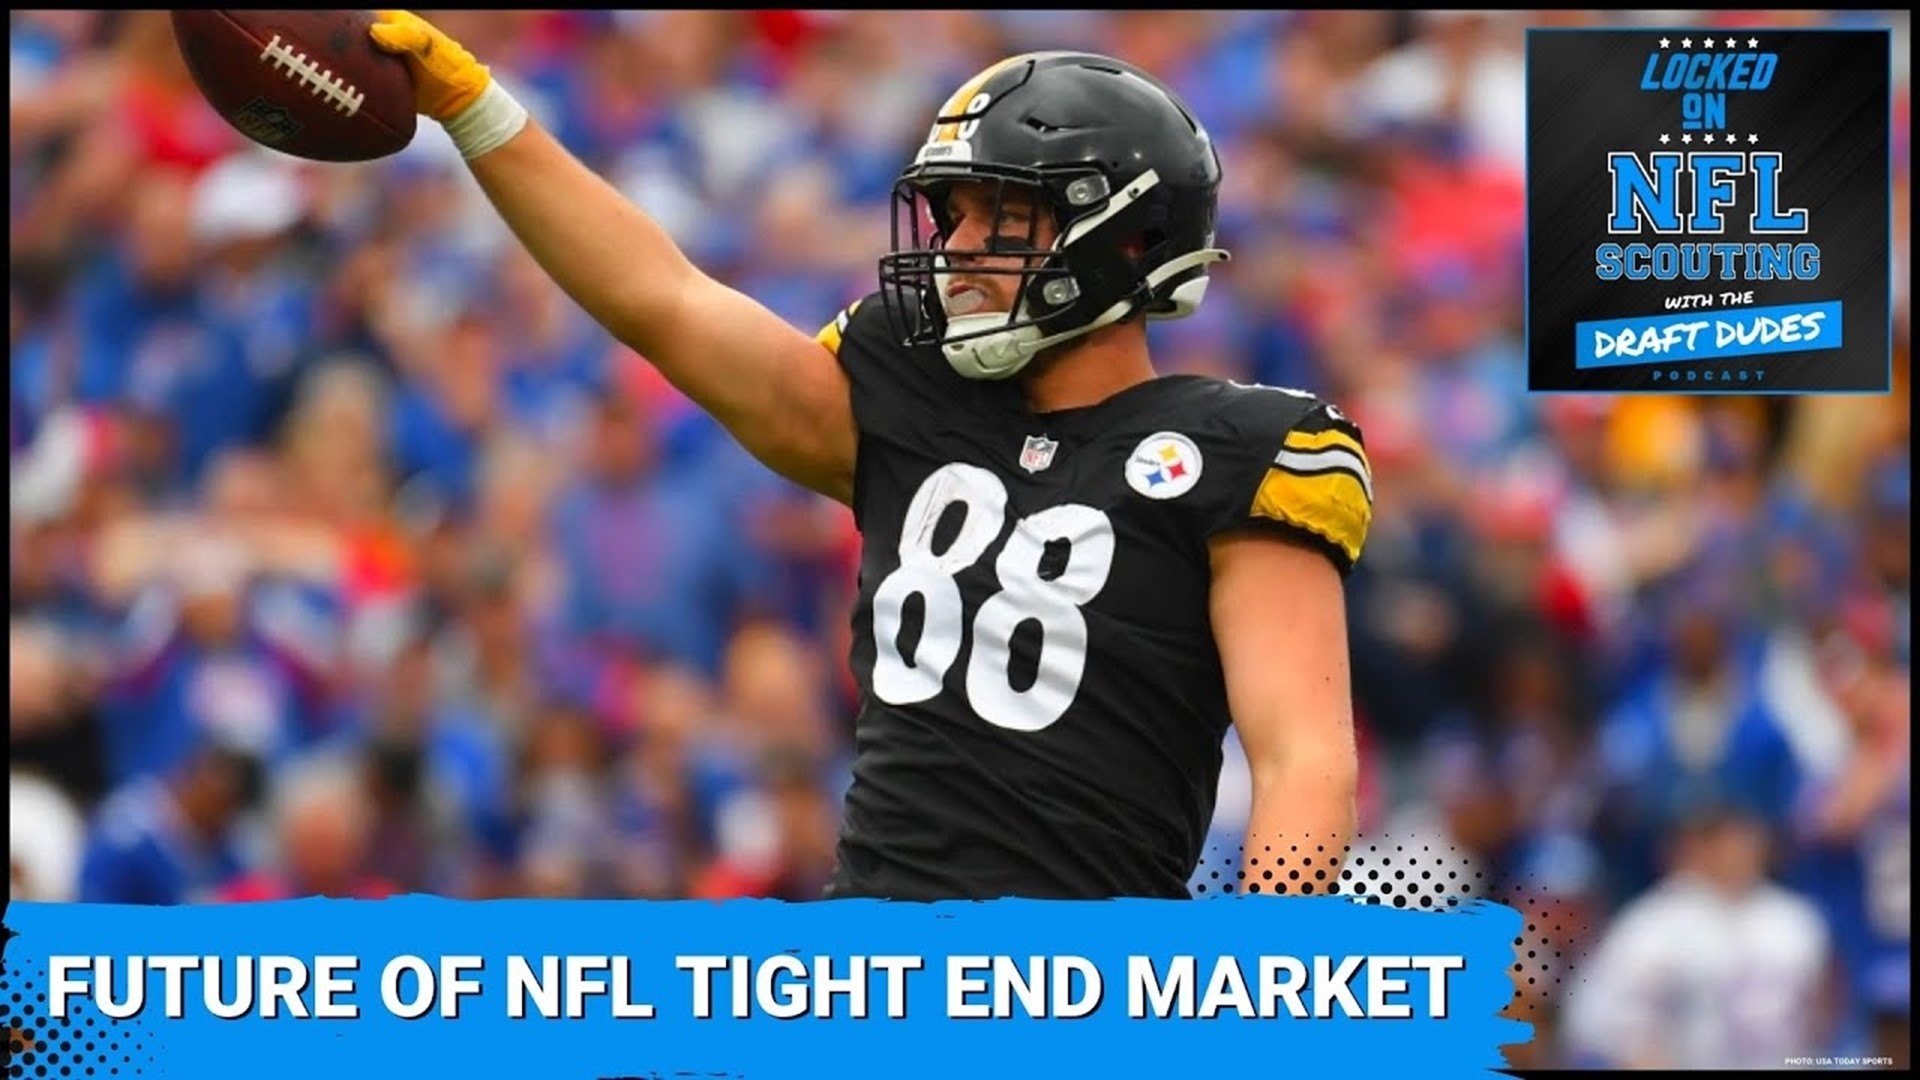 The NFL has found great value in tight end production, especially considering how much less top players at the position cost compared to top wide receivers.